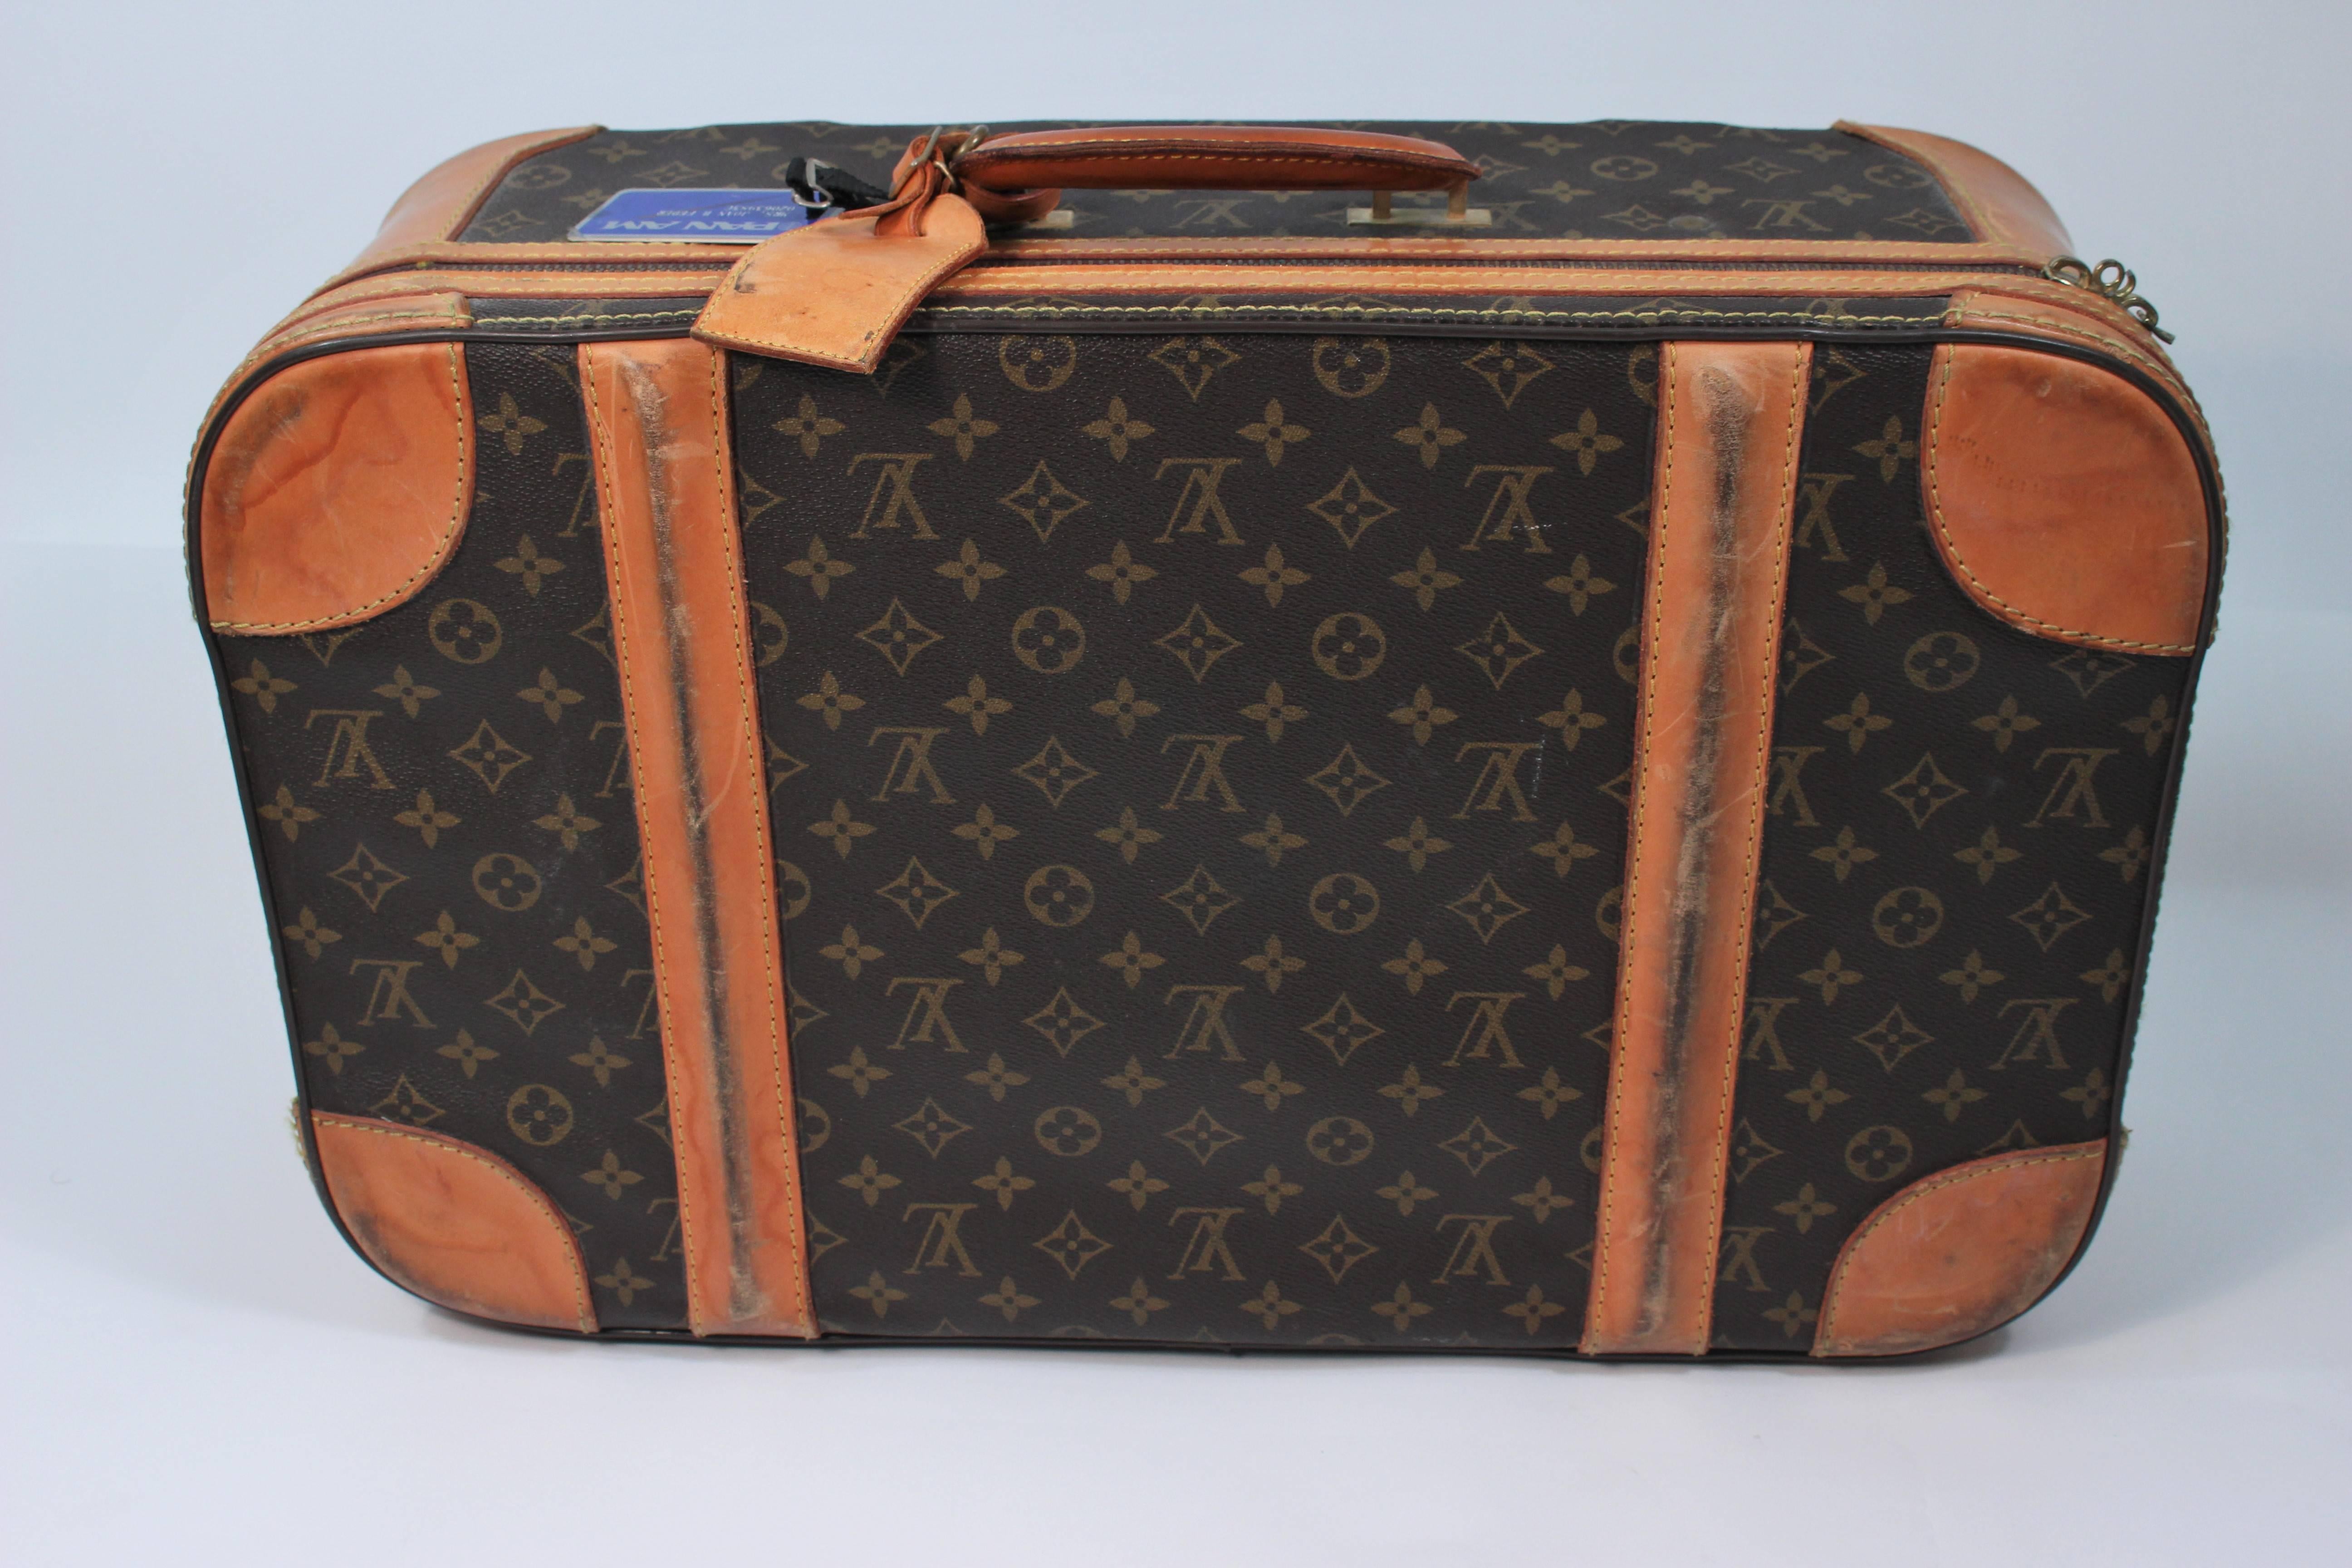 This vintage Louis Vuitton luggage  features the classic monogram style print and gold hardware. In vintage sold 'As is' condition, shows signs of wear on leather, hardware is aged (see photographs), locking part of the zipper pulls is broken. Clean